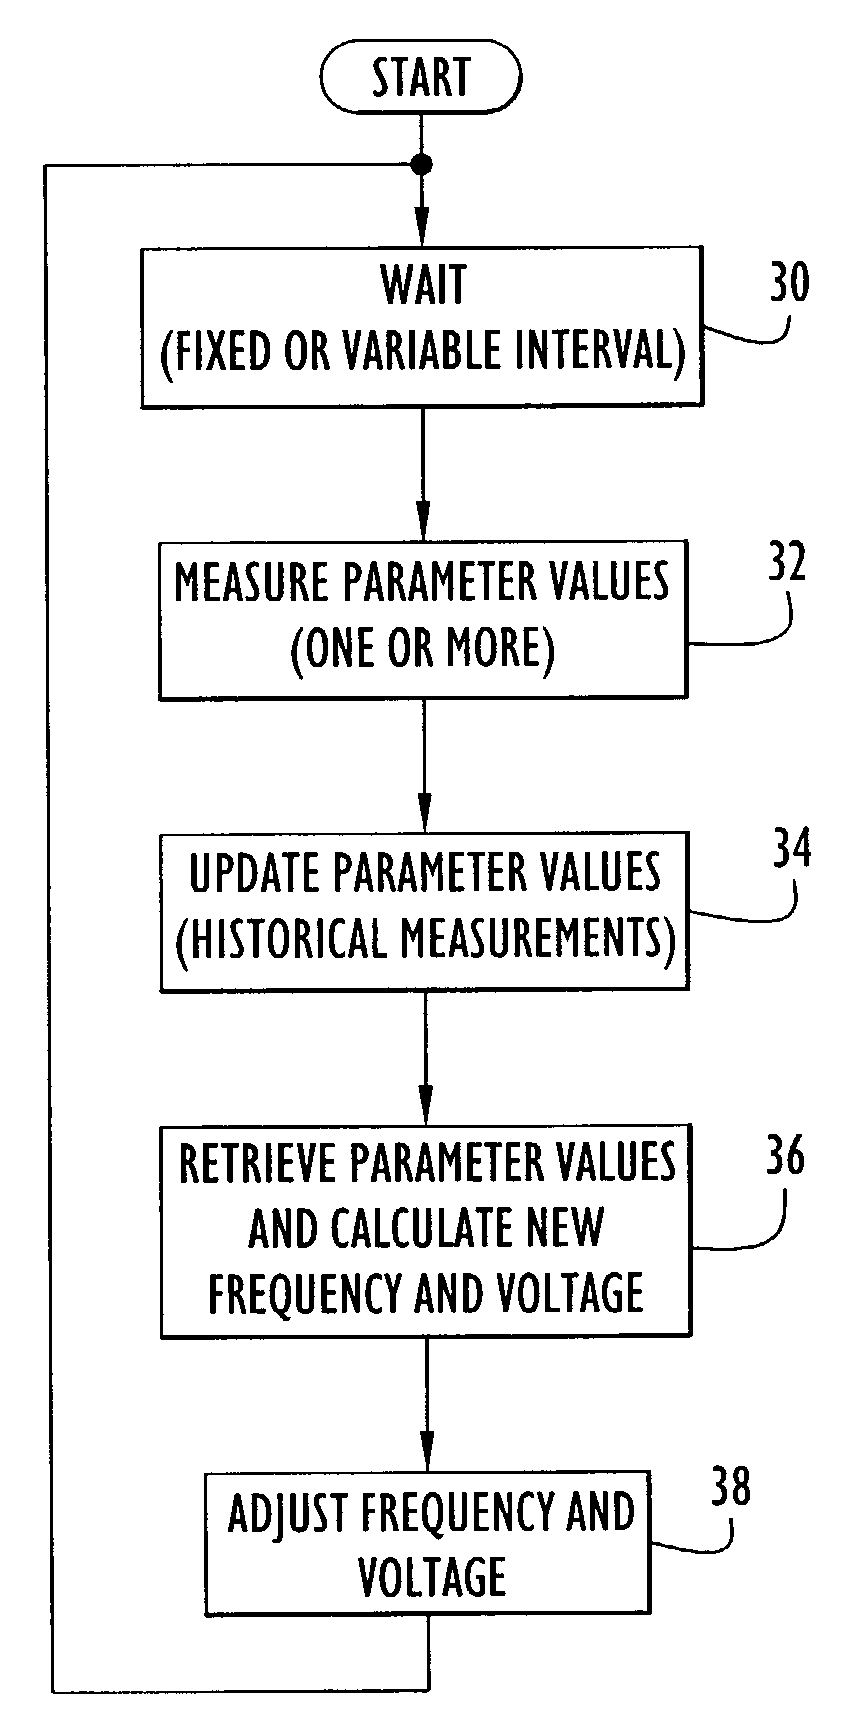 Method and apparatus for optimizing performance and battery life of electronic devices based on system and application parameters